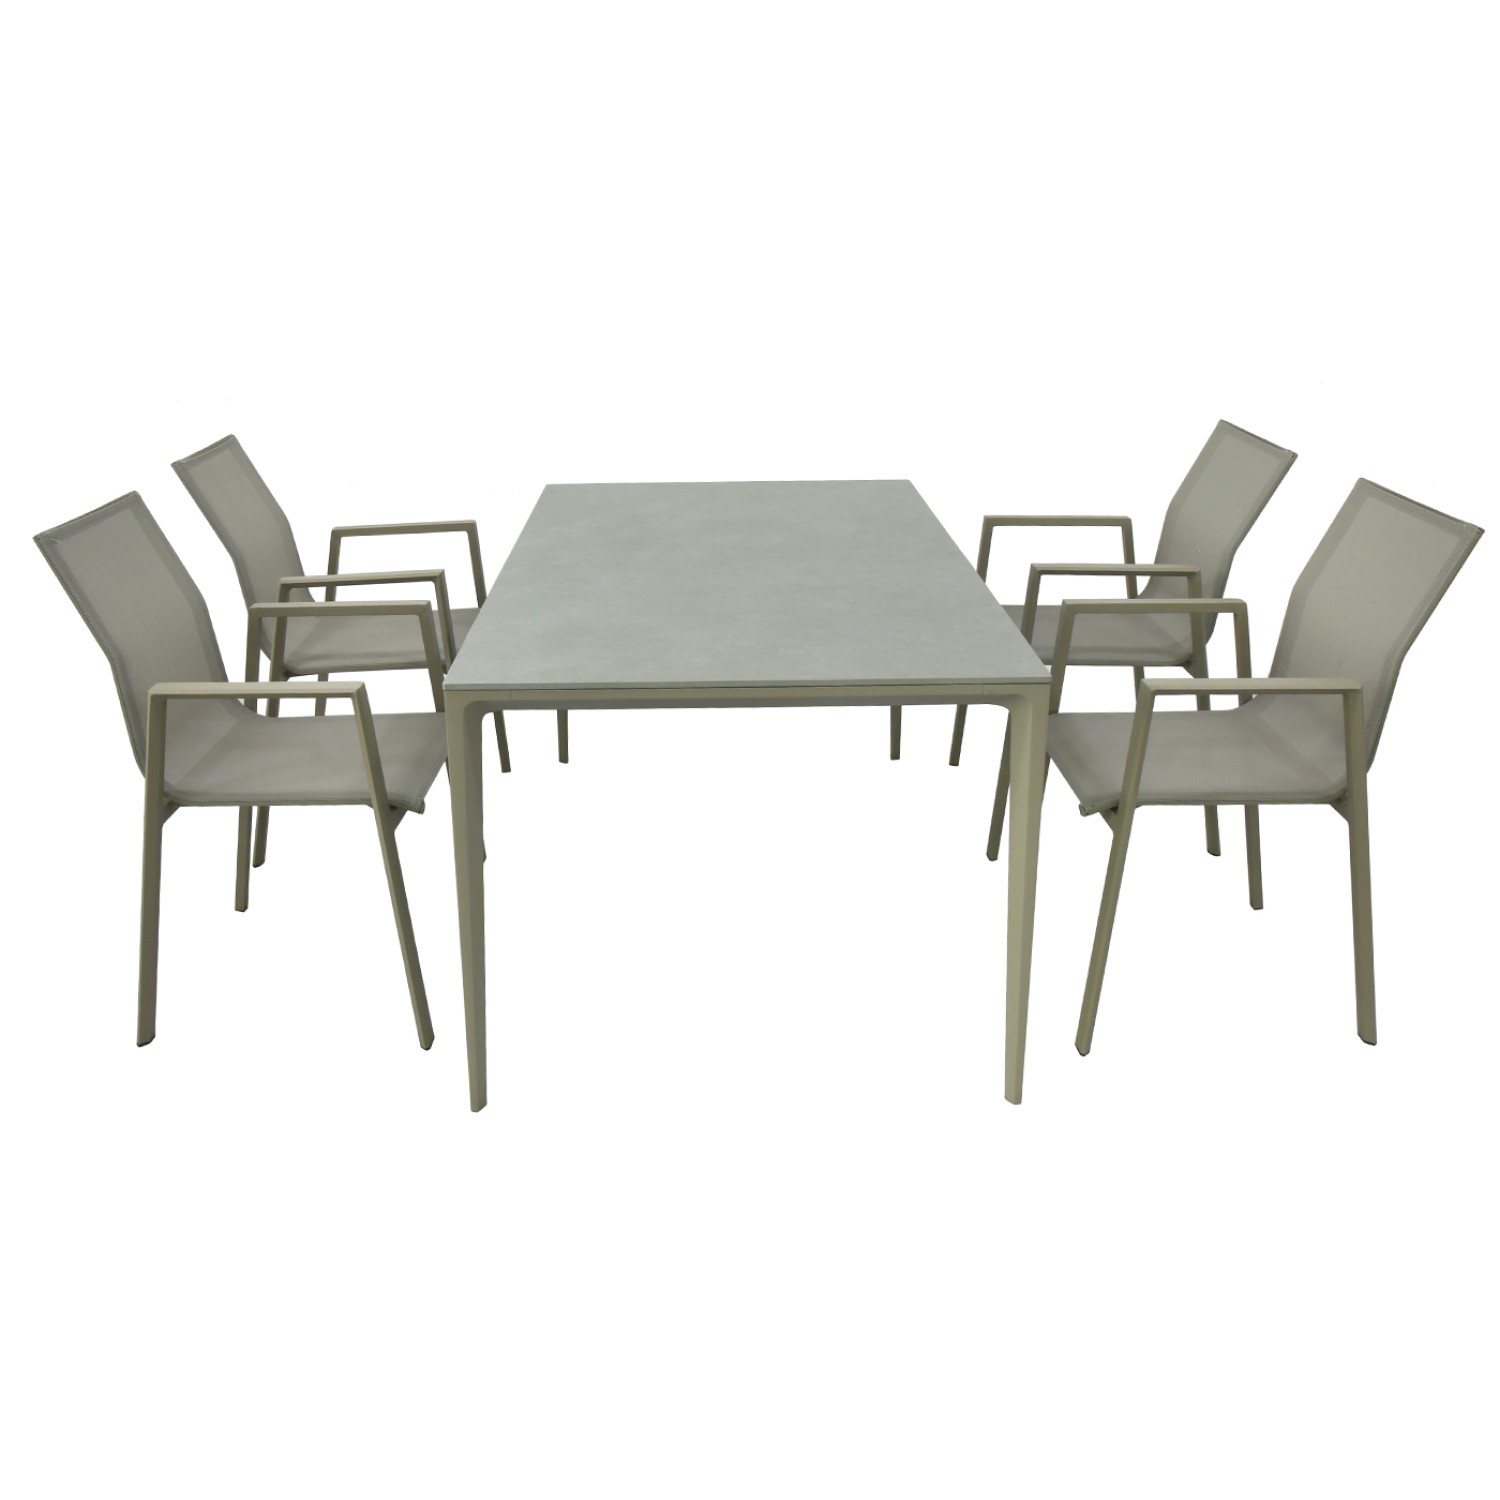 Outdoor Dining Table Chairs Set - Outdoor Furniture | Shinlin Sintered Stone Outdoor Dining Table CZ013